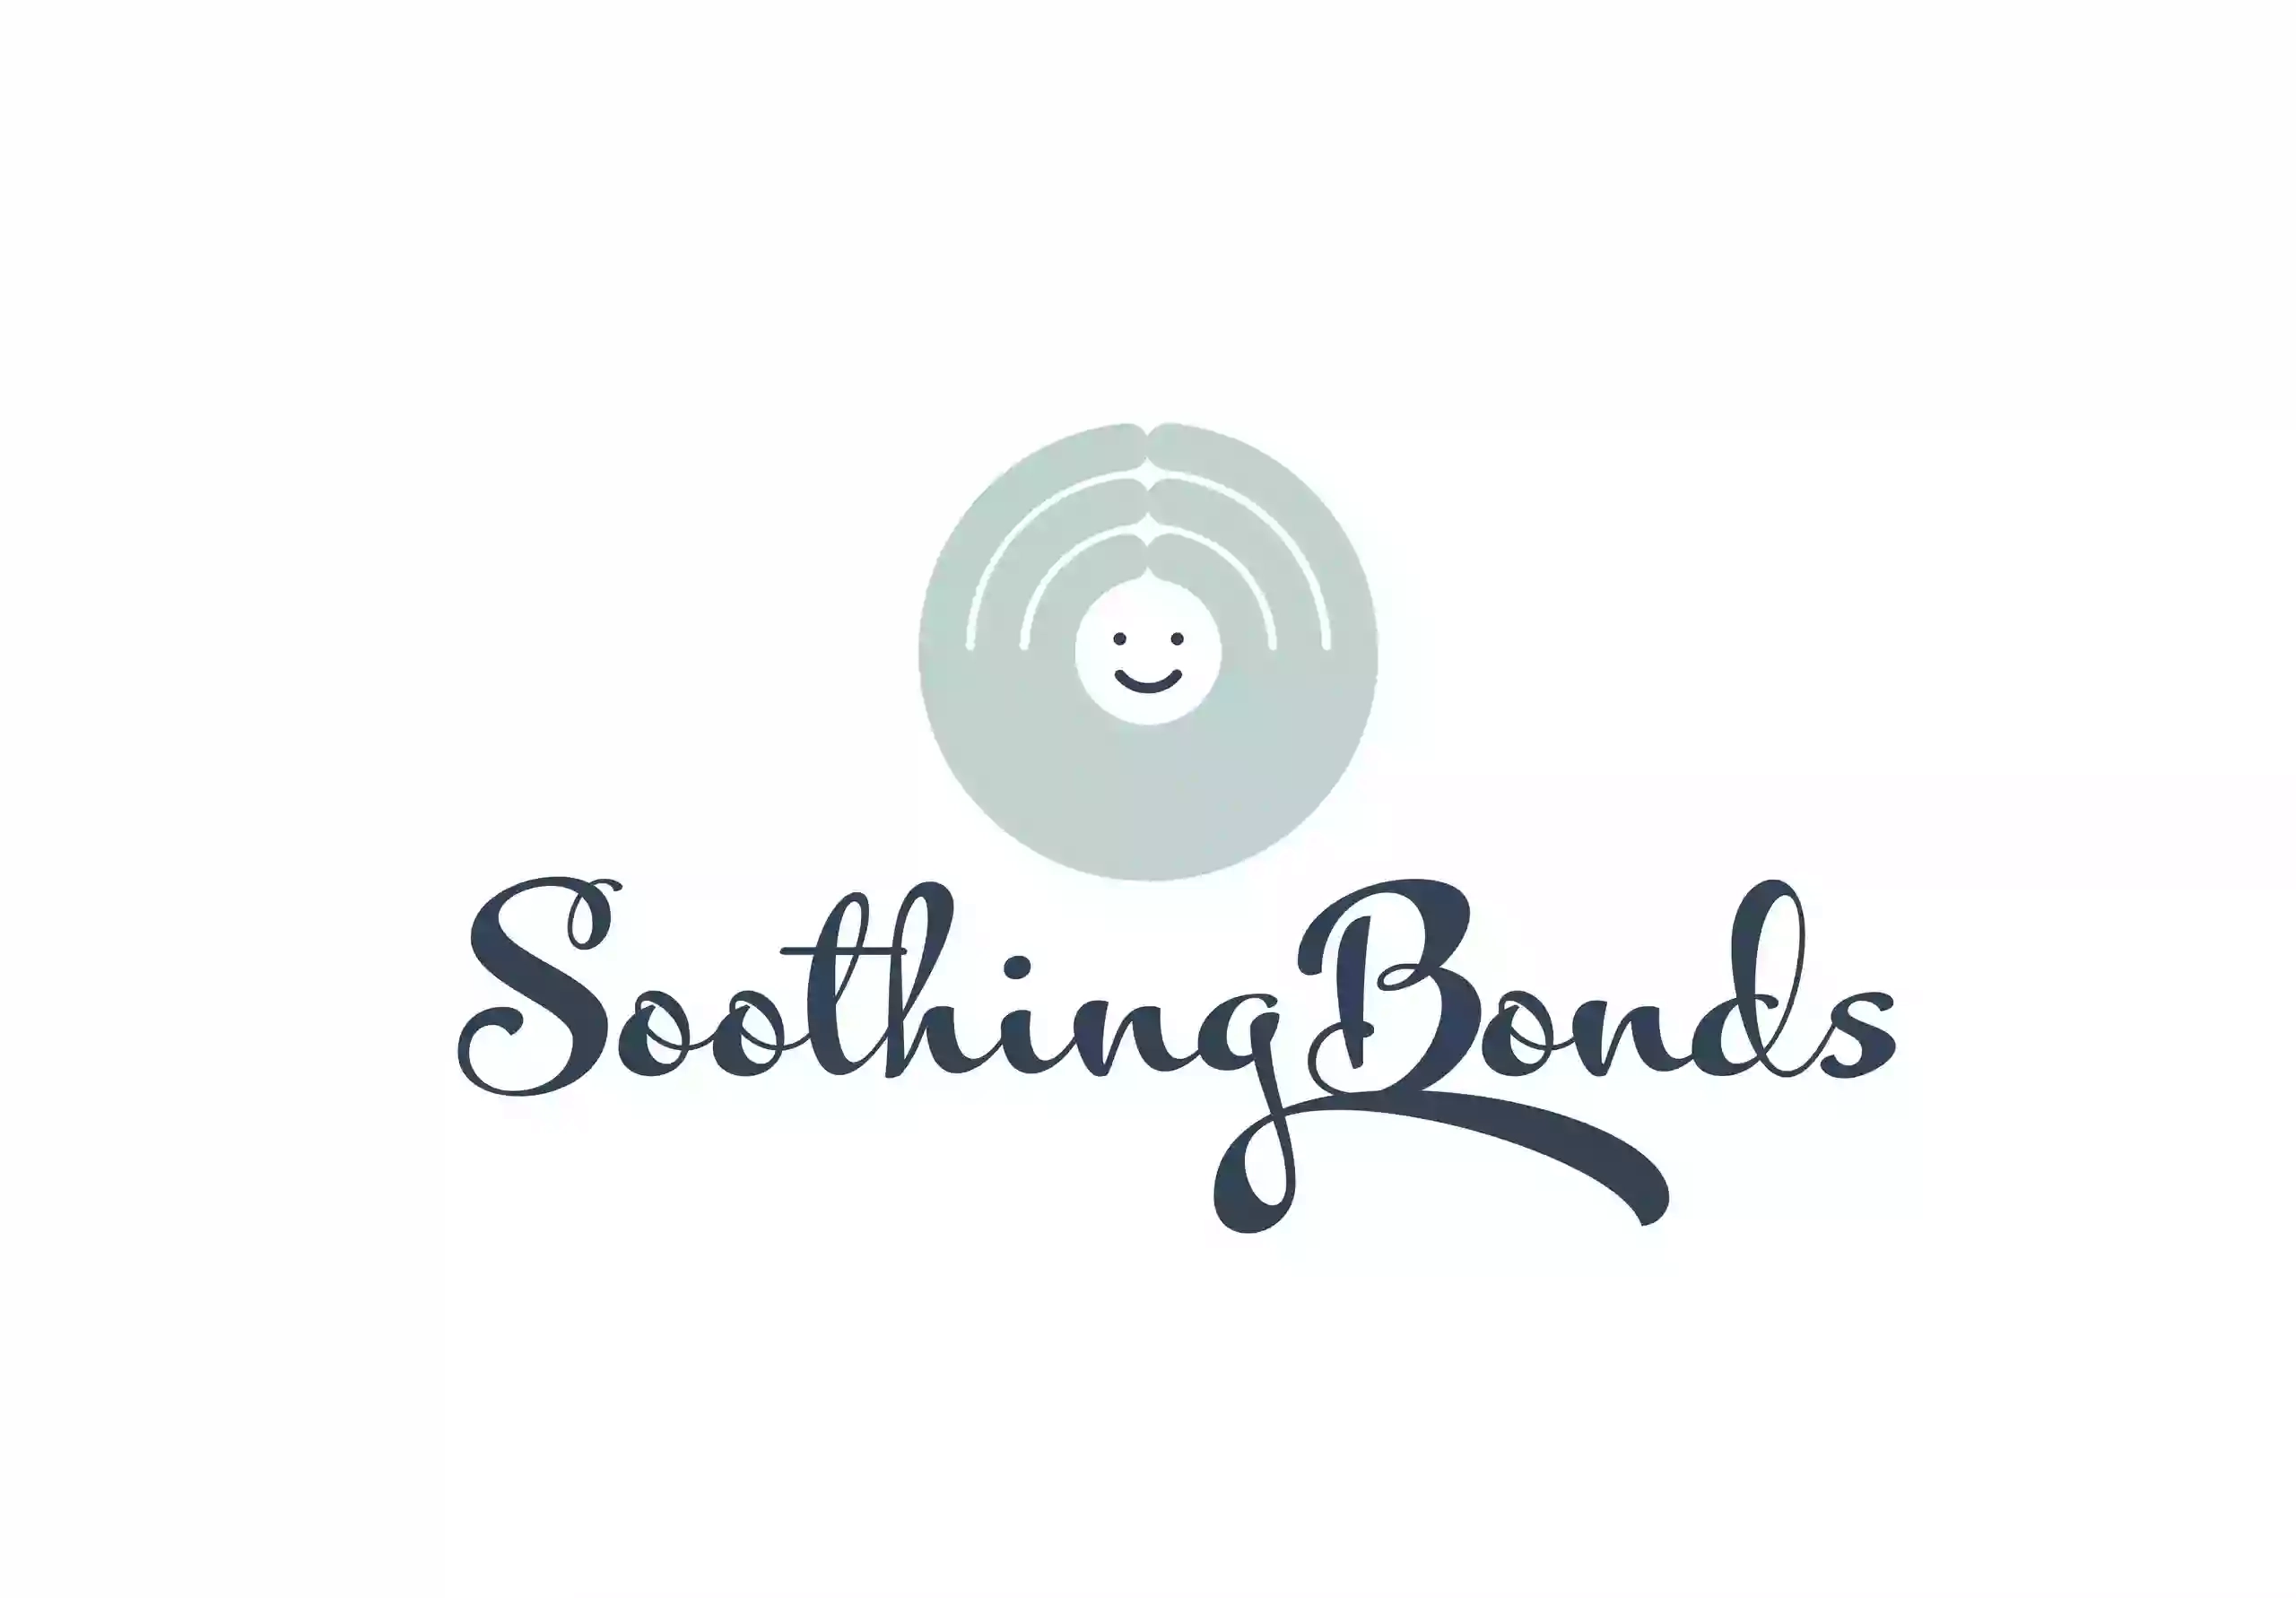 Soothing bonds